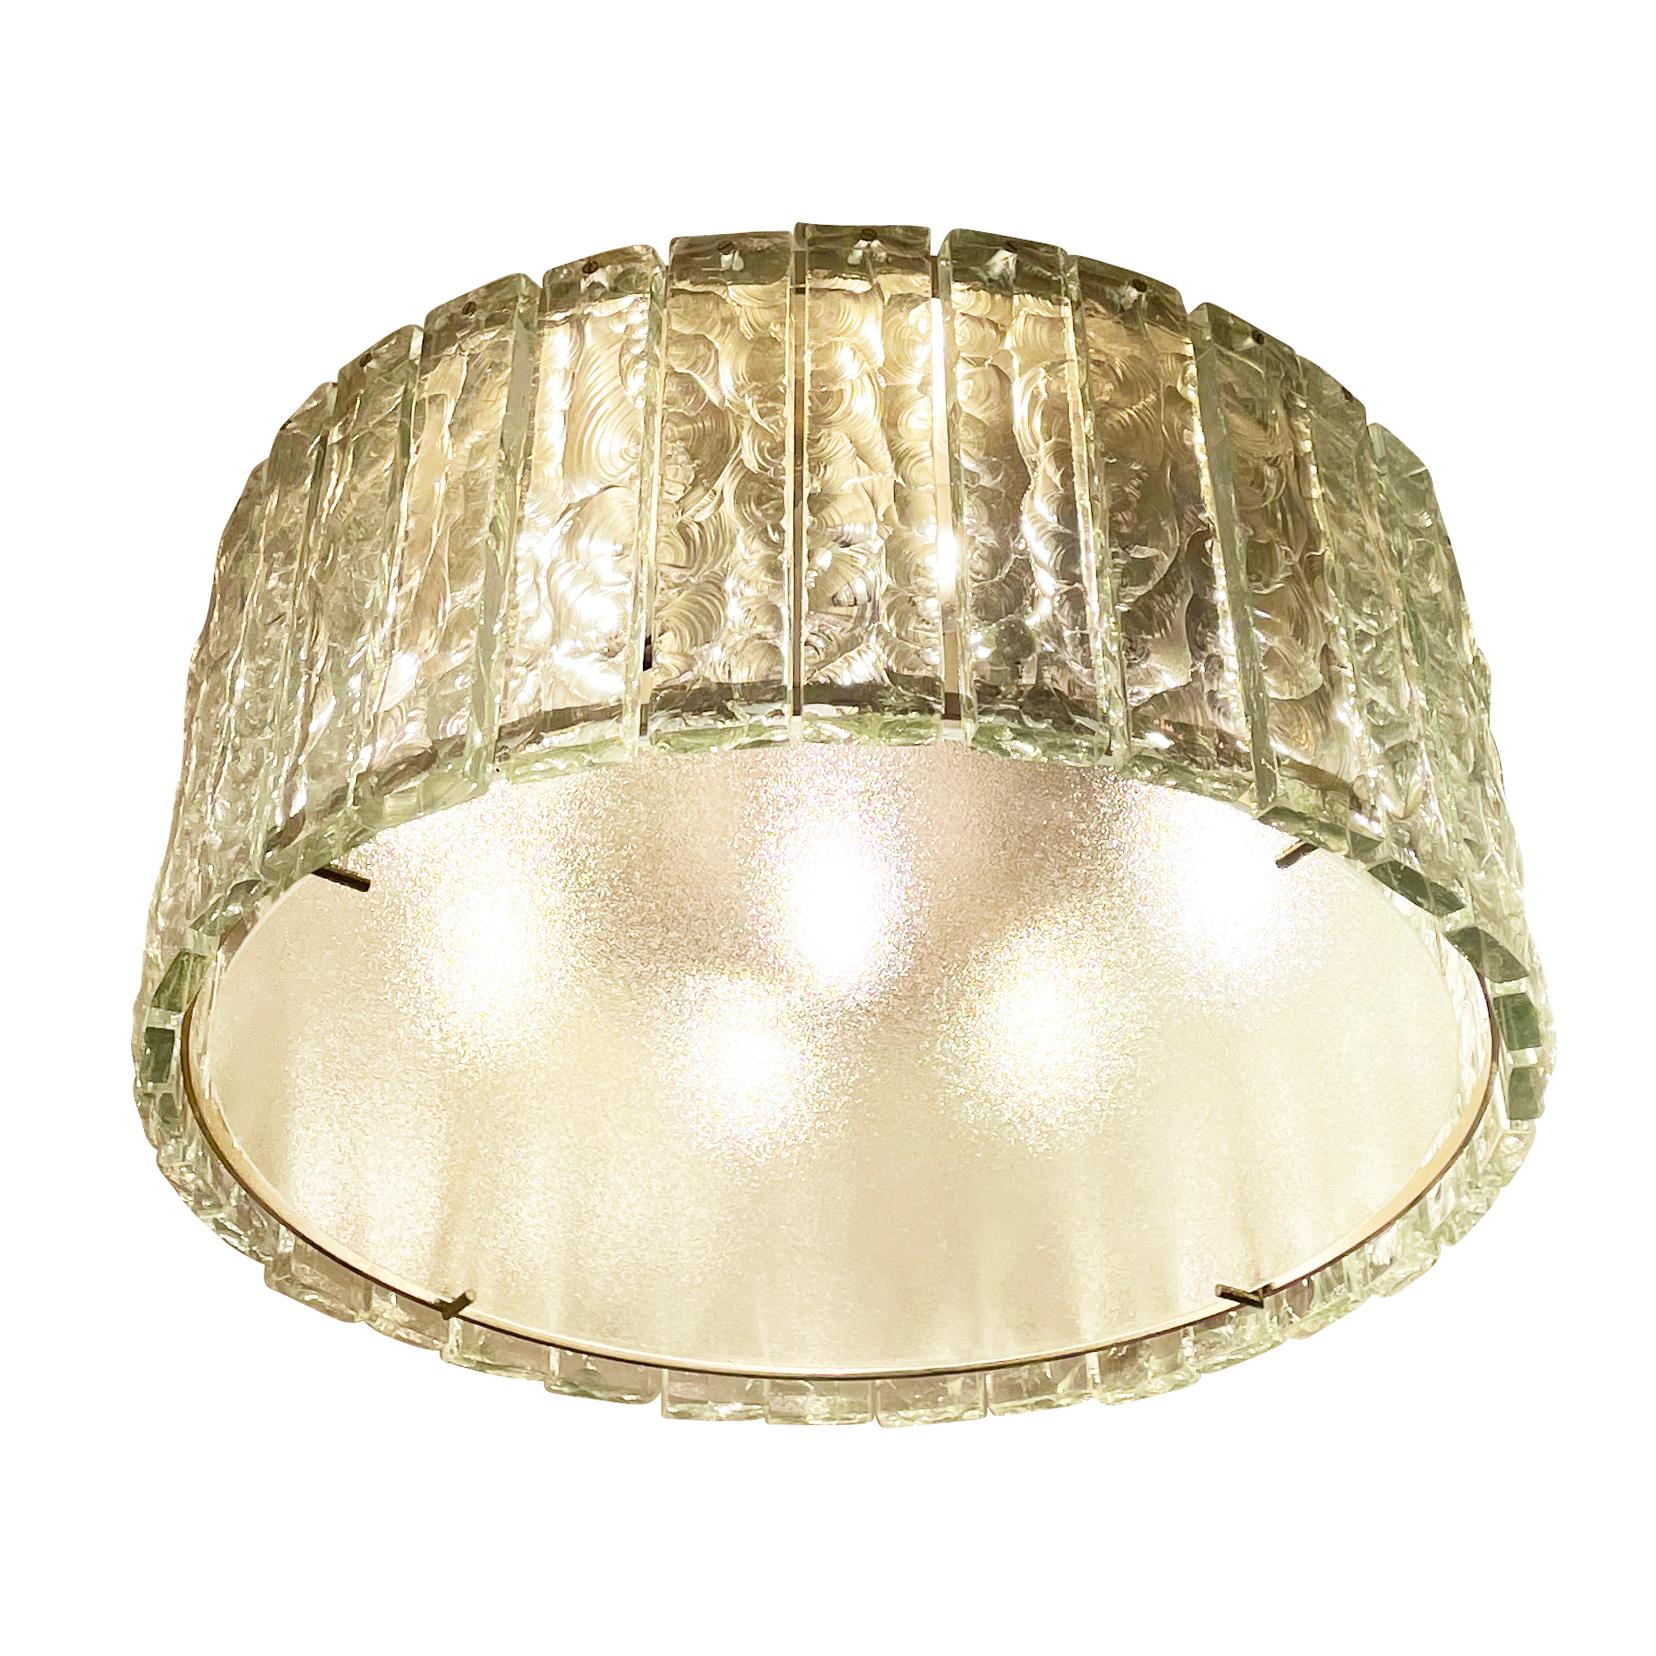 Fontana Arte ceiling light model 2448 designed by Max Ingrand in the 1960s. Features a nickel-plated structure holding dozens of chiseled glasses. Closed at the bottom by a frosted glass diffuser. Holds eight candelabra sockets and one Edison